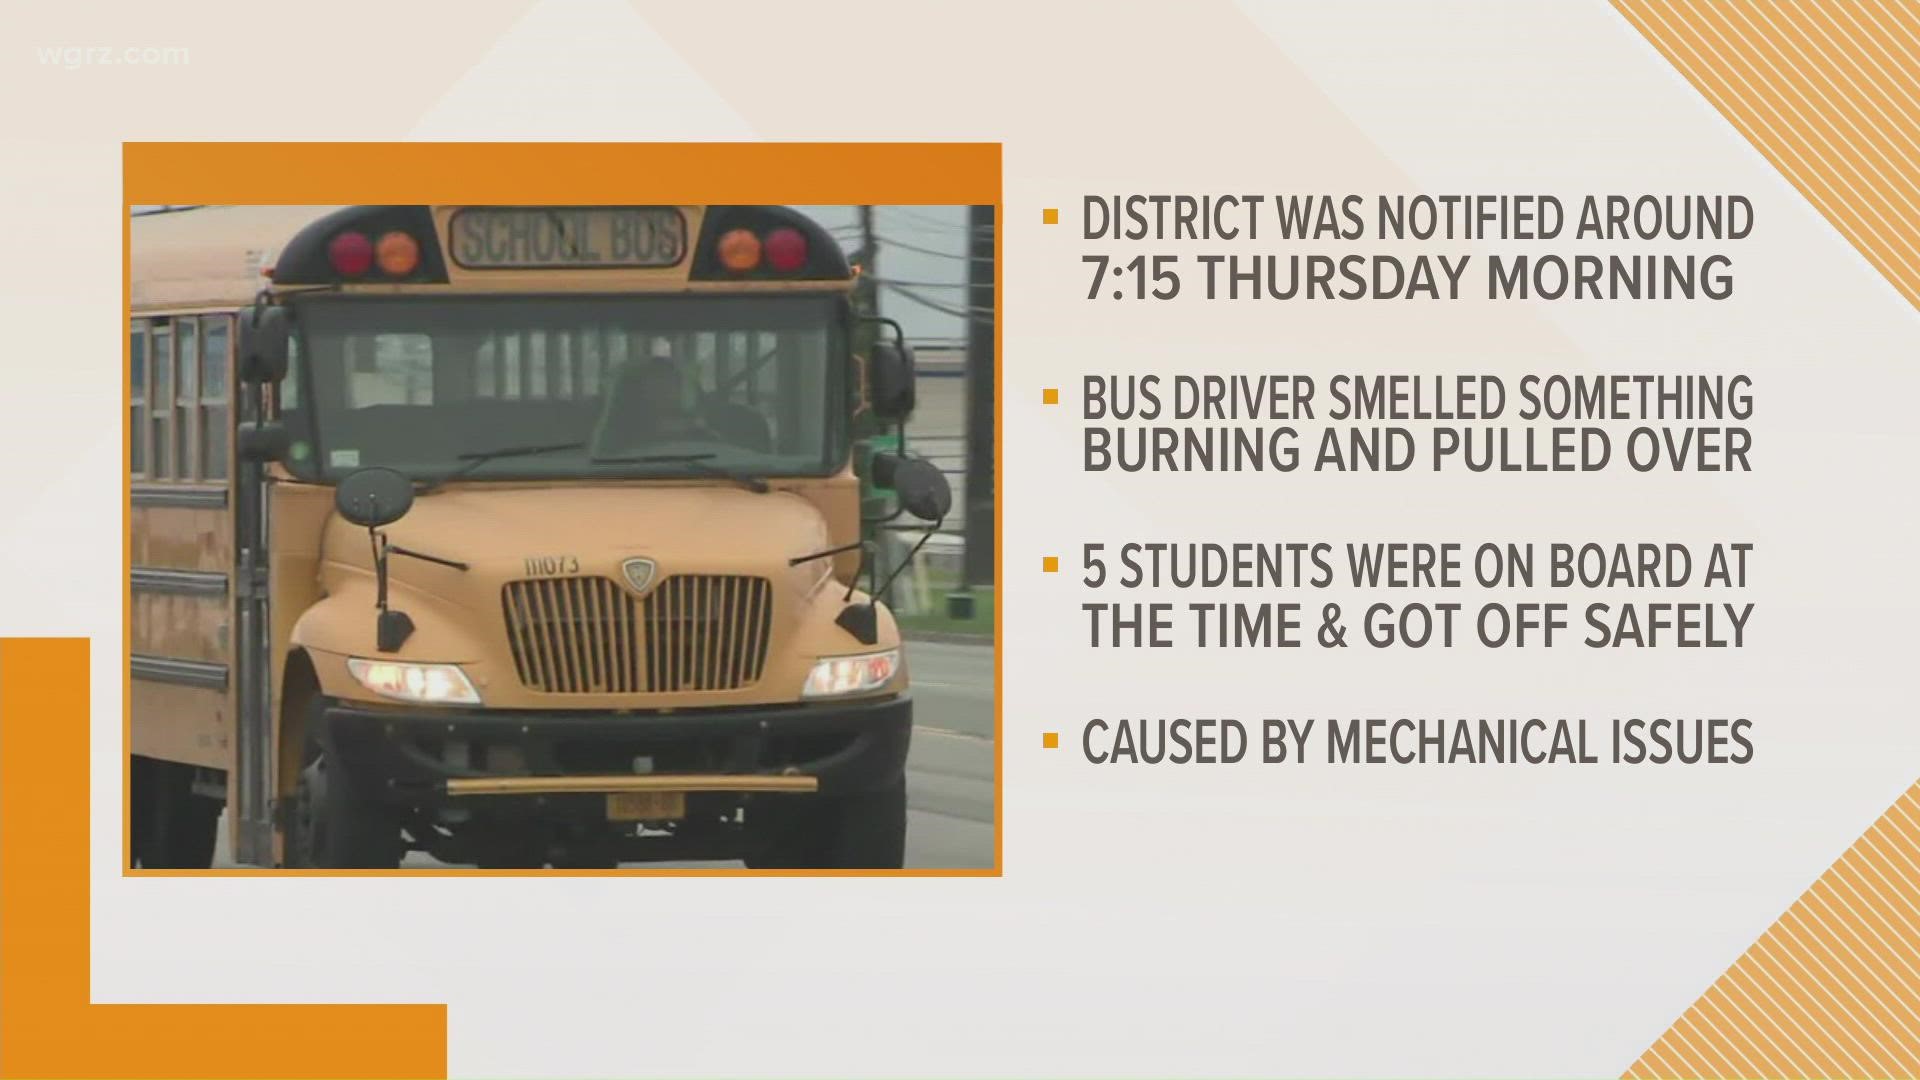 the bus driver smelled something burning, pulled over, got the students off the bus and called 9-1-1.